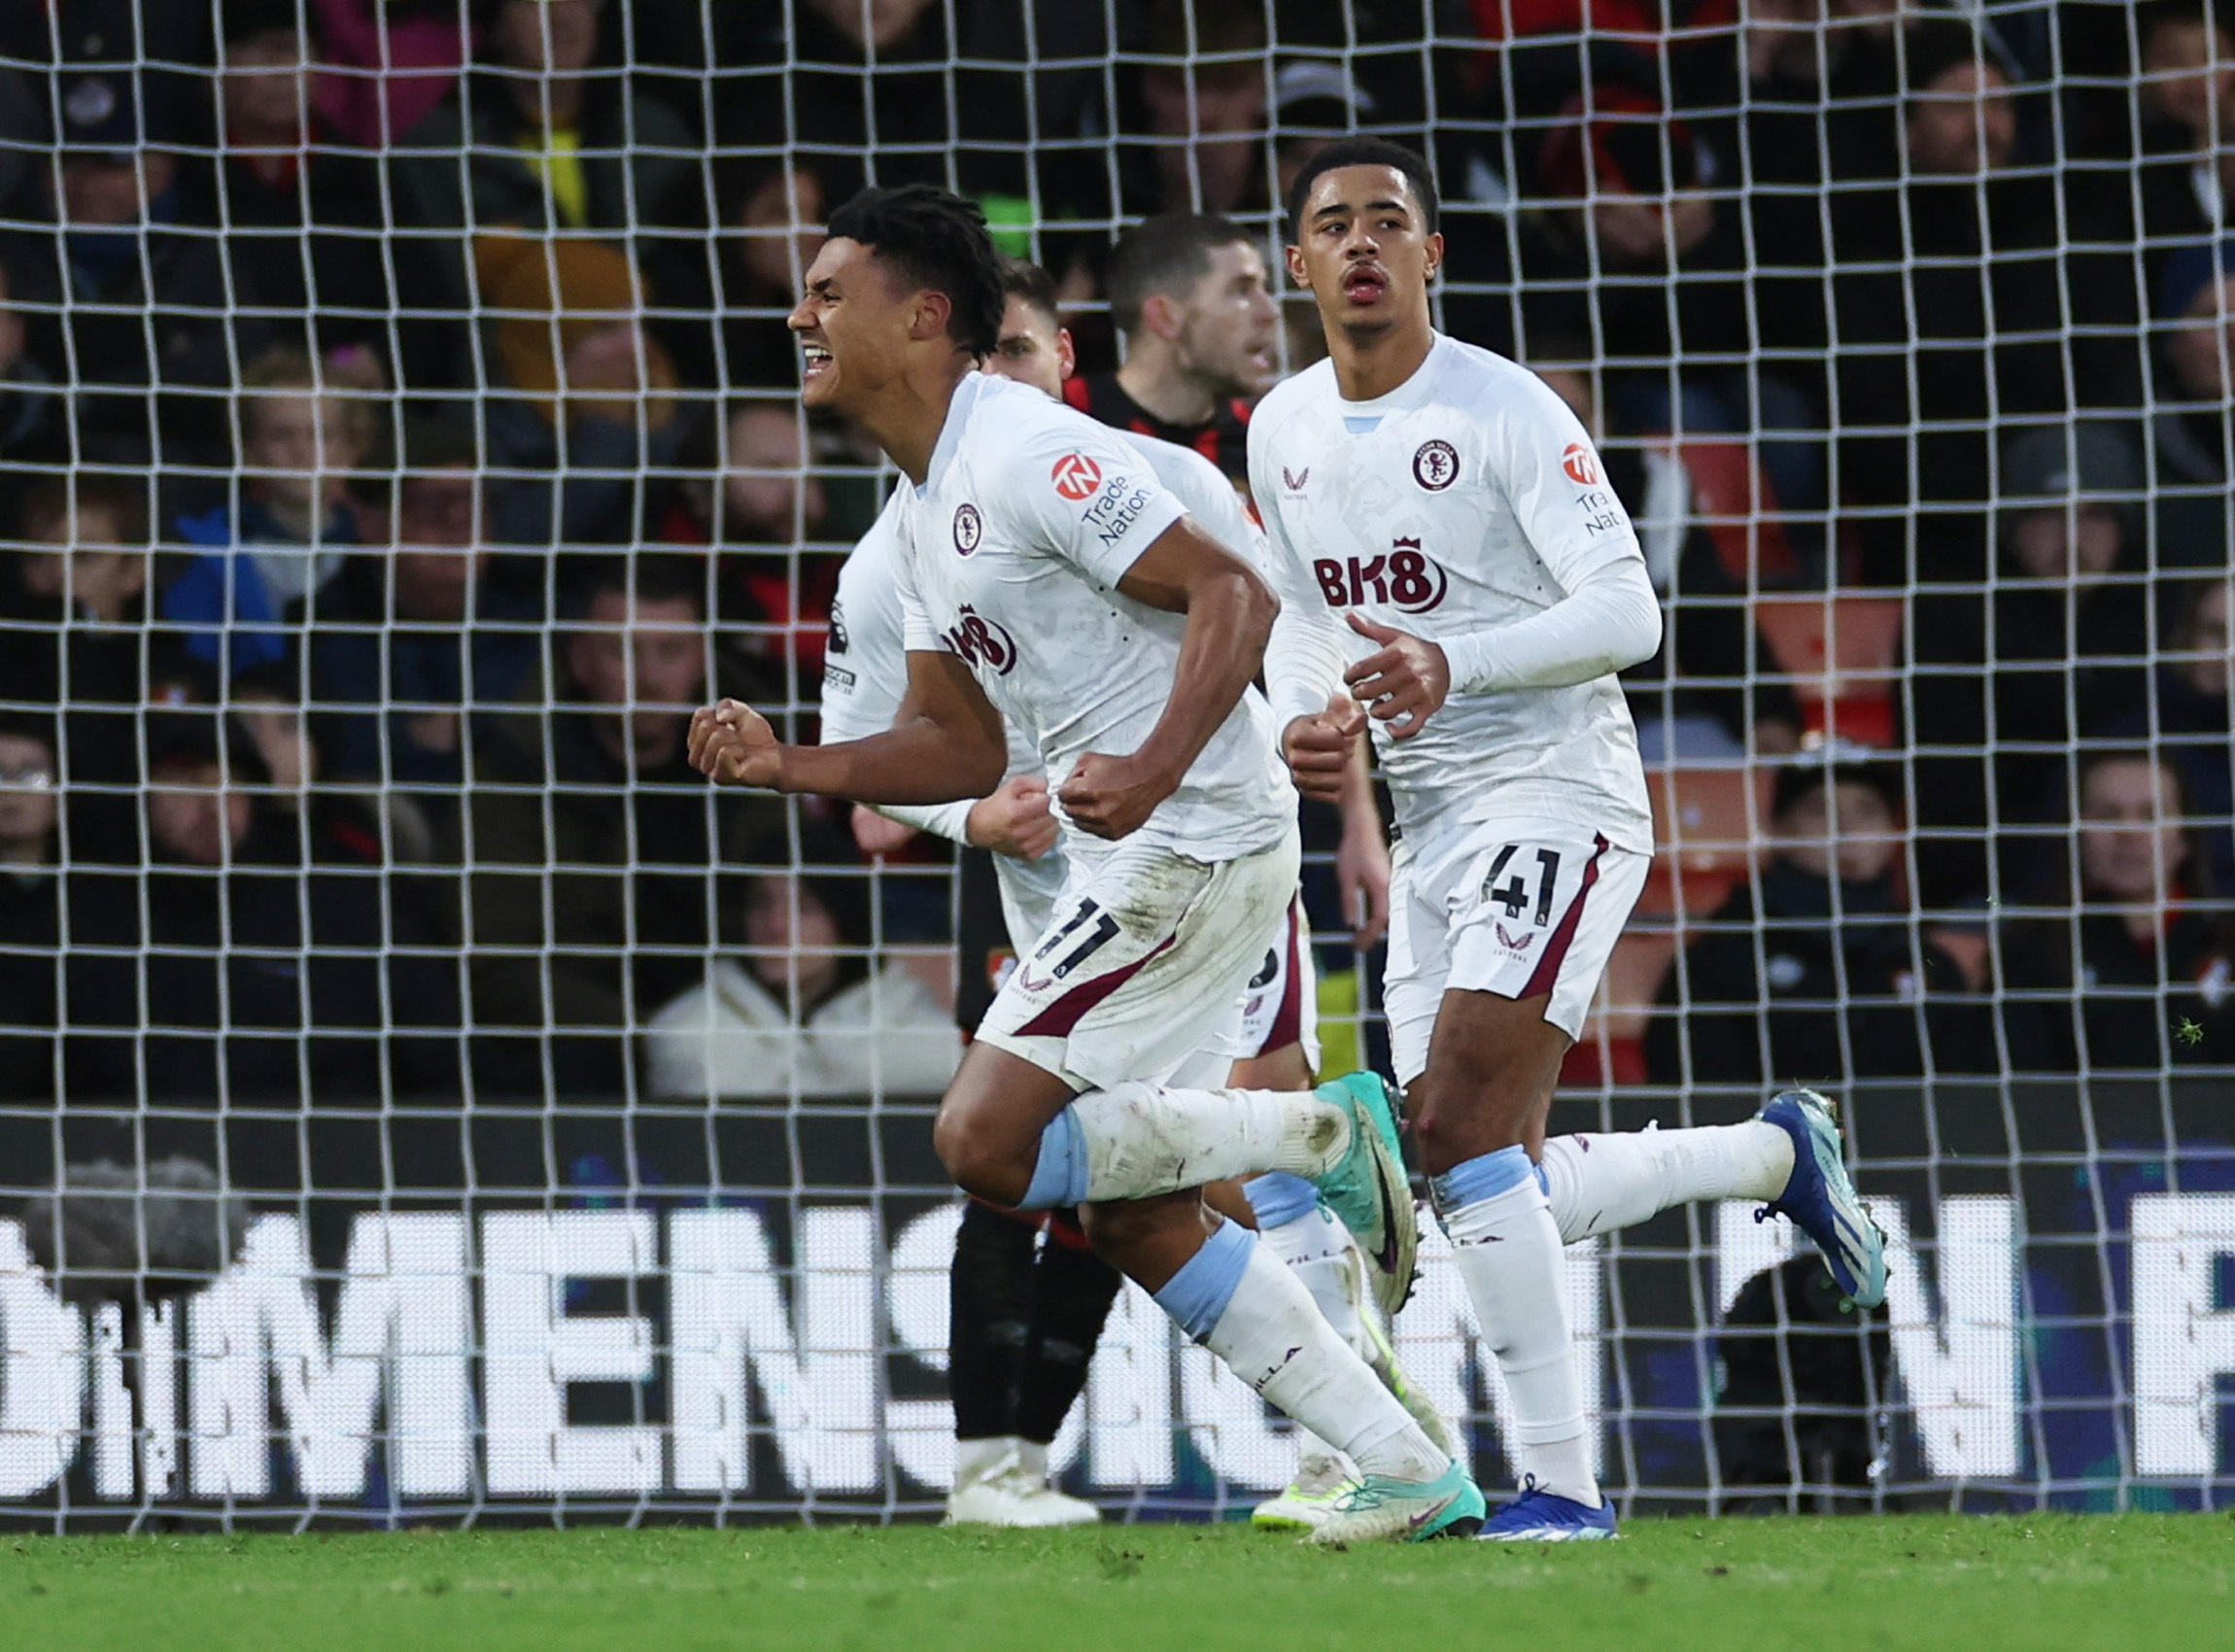 Soccer-Watkins heads late equaliser as Aston Villa draw 2-2 with Bournemouth